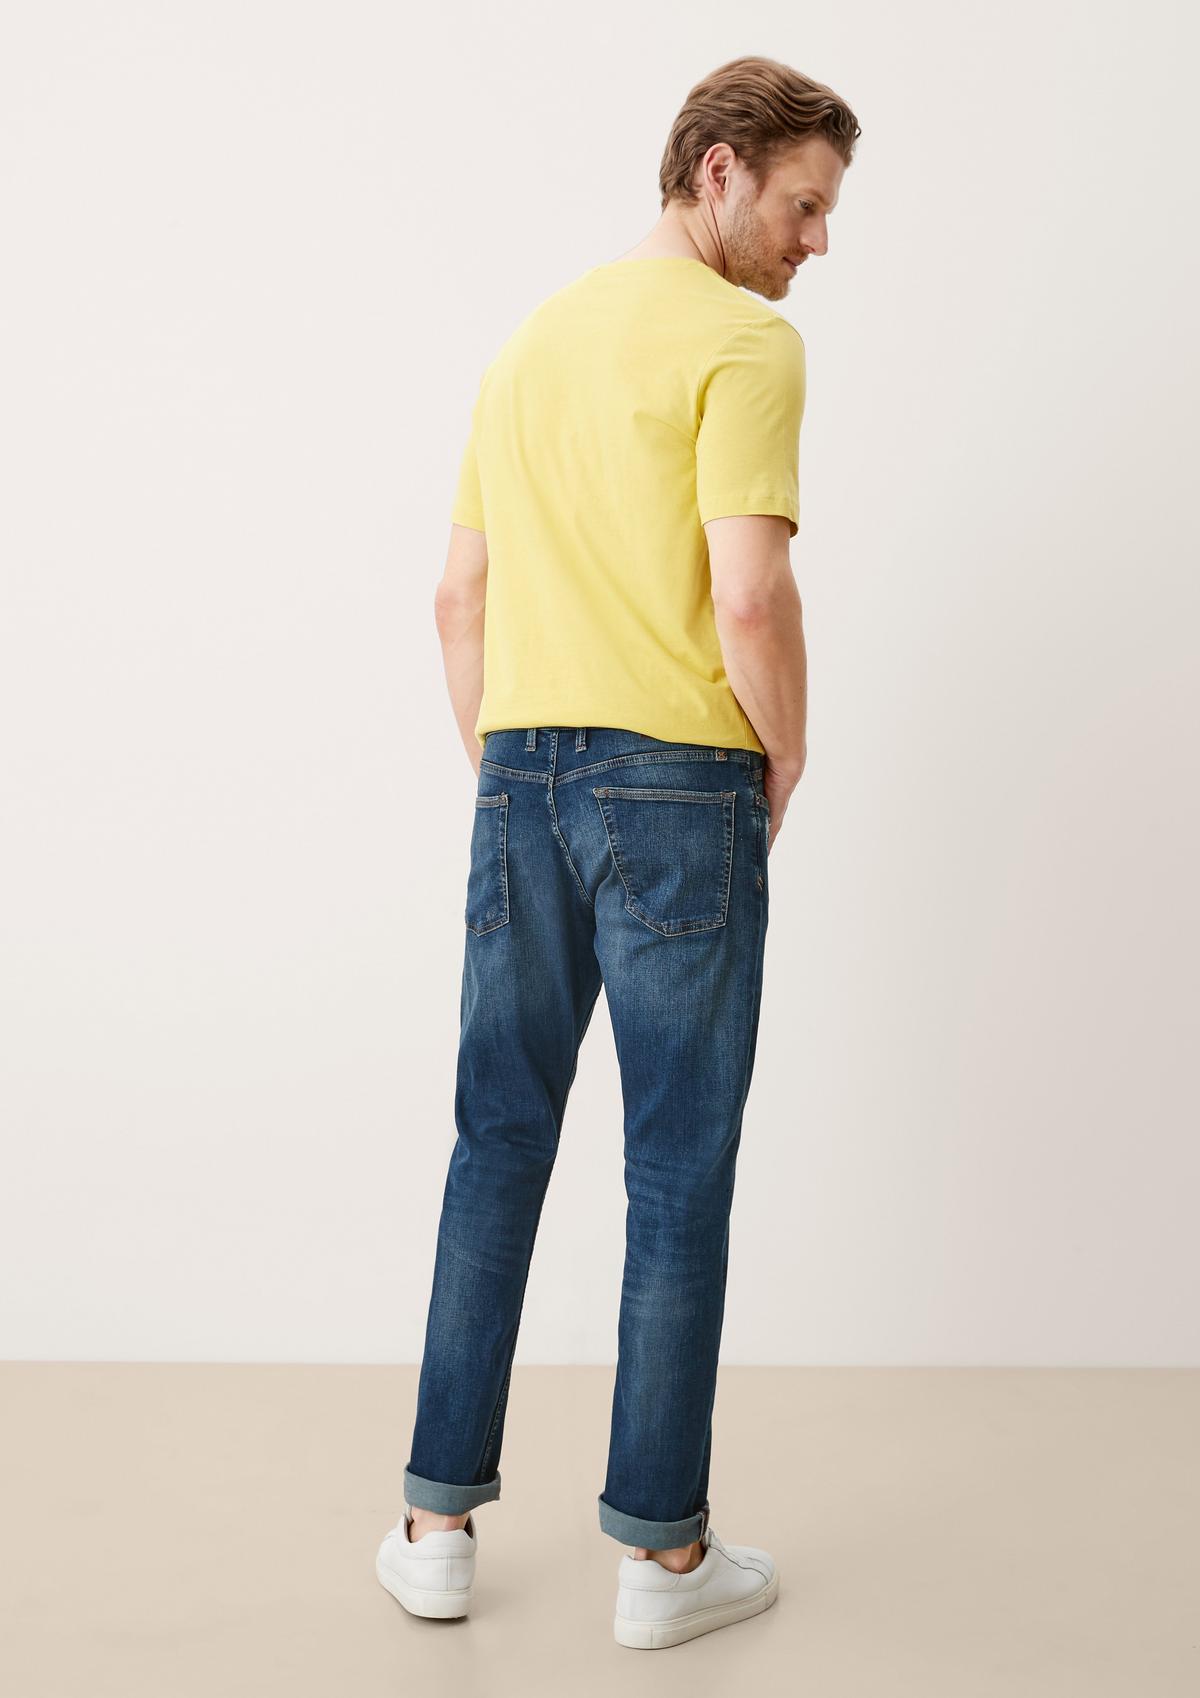 s.Oliver Jeans Keith / Slim Fit / Mid Rise / Slim Leg